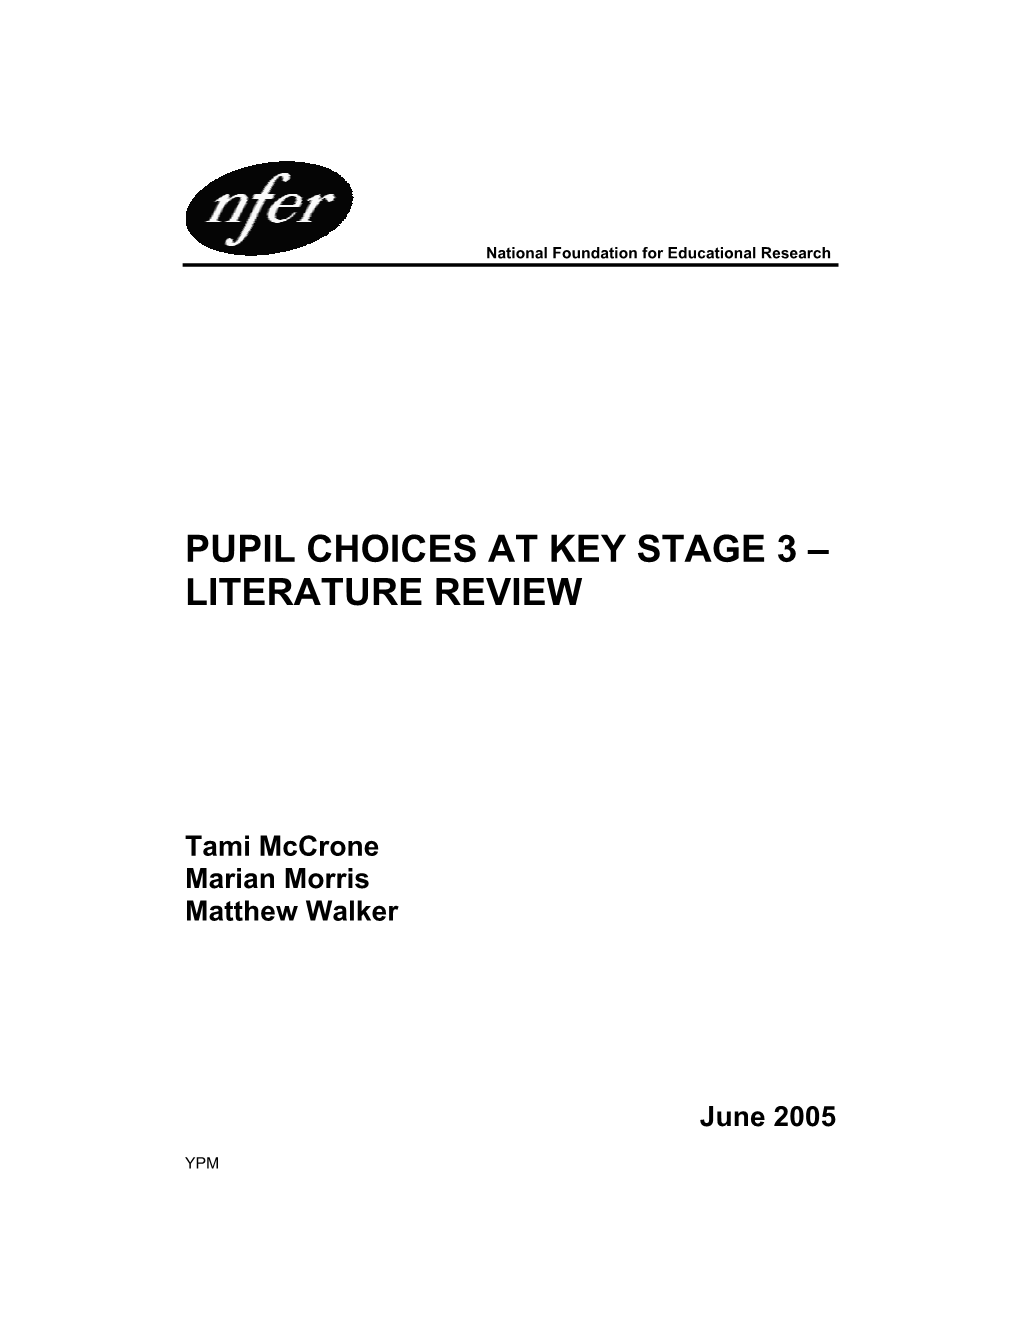 Pupil Choices at Key Stage 3 – Literature Review